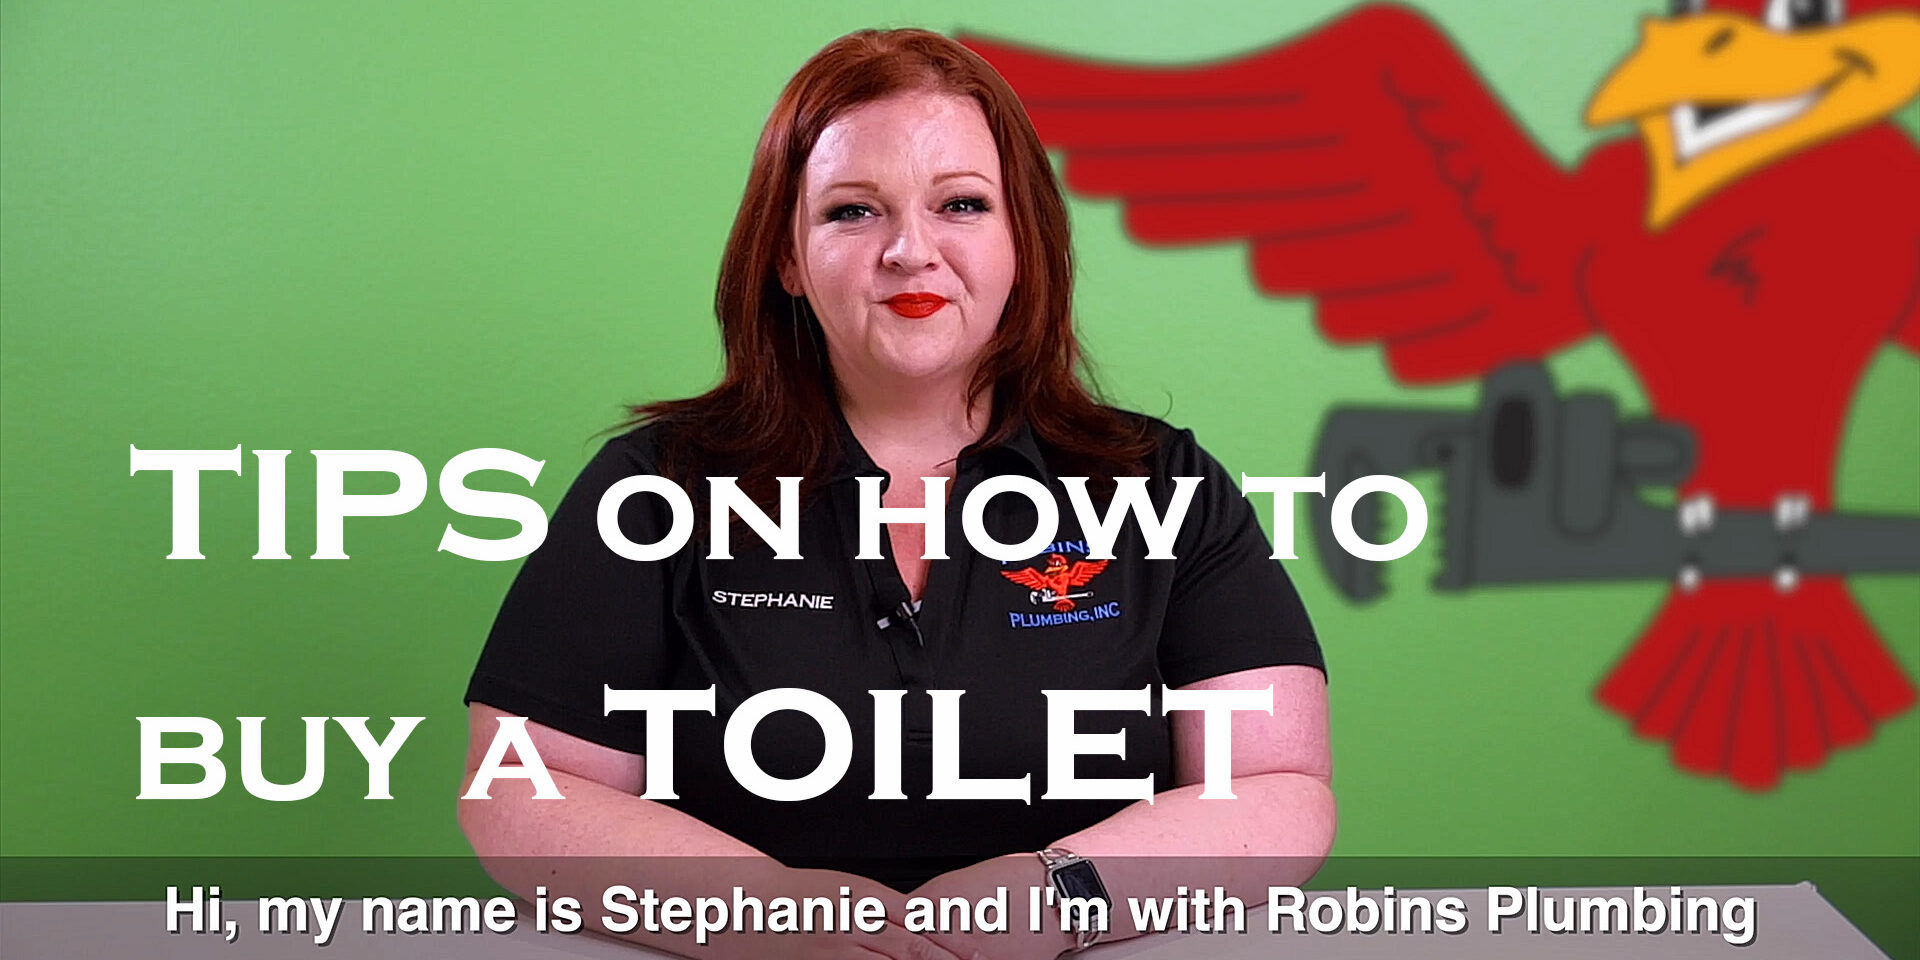 Cover photo for blog and video "Tips on How to Buy a Toilet"